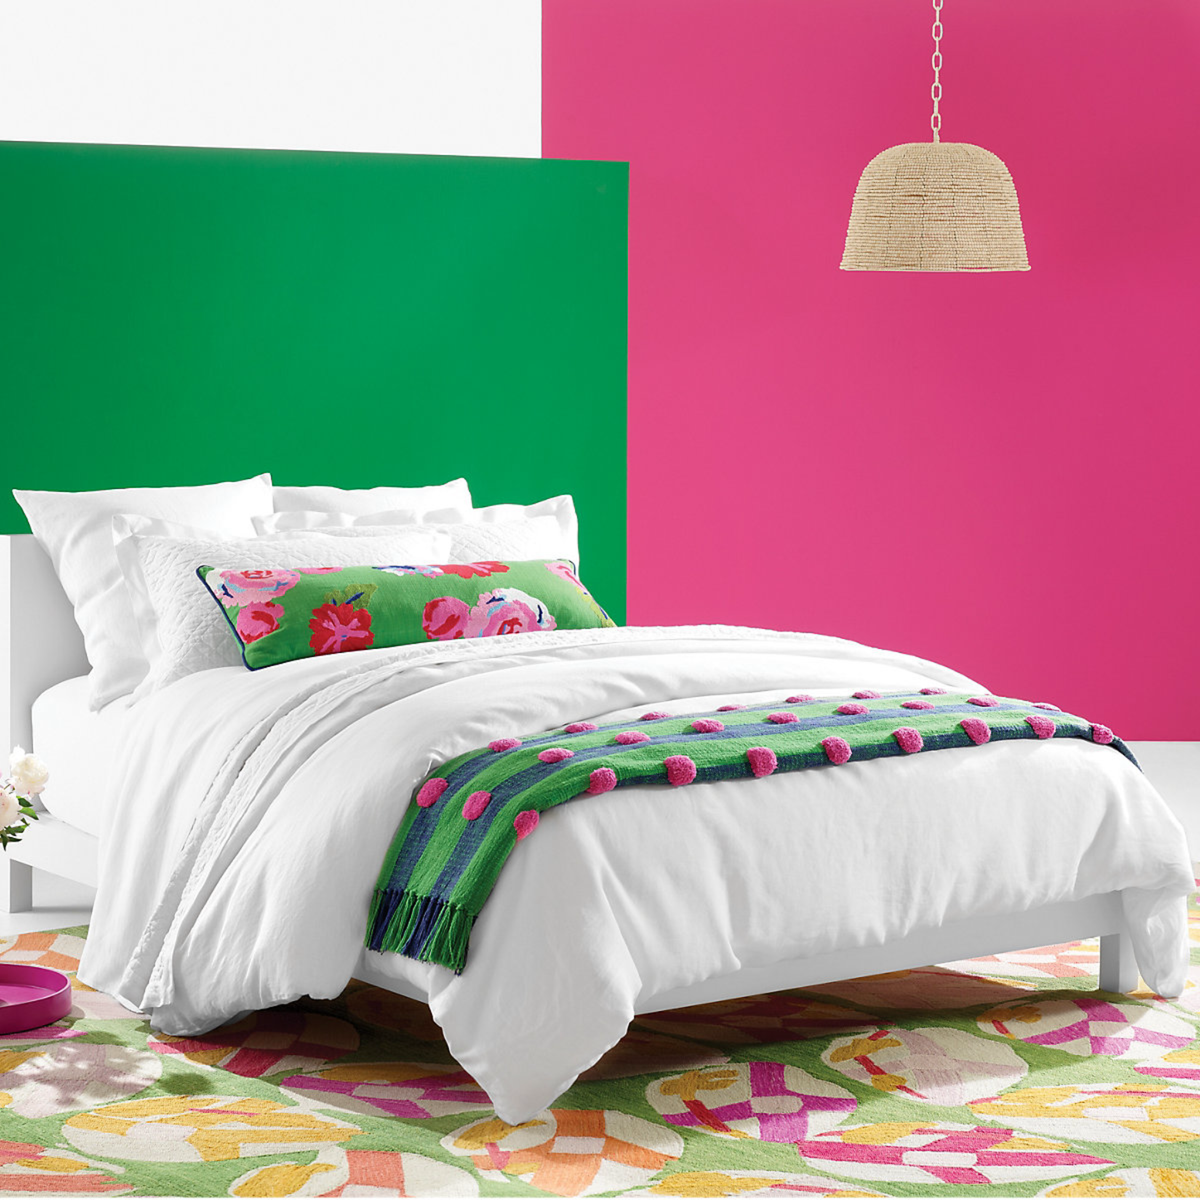 Colorful Coordinate with White Pine Cone Hill Lush Linen Bedding